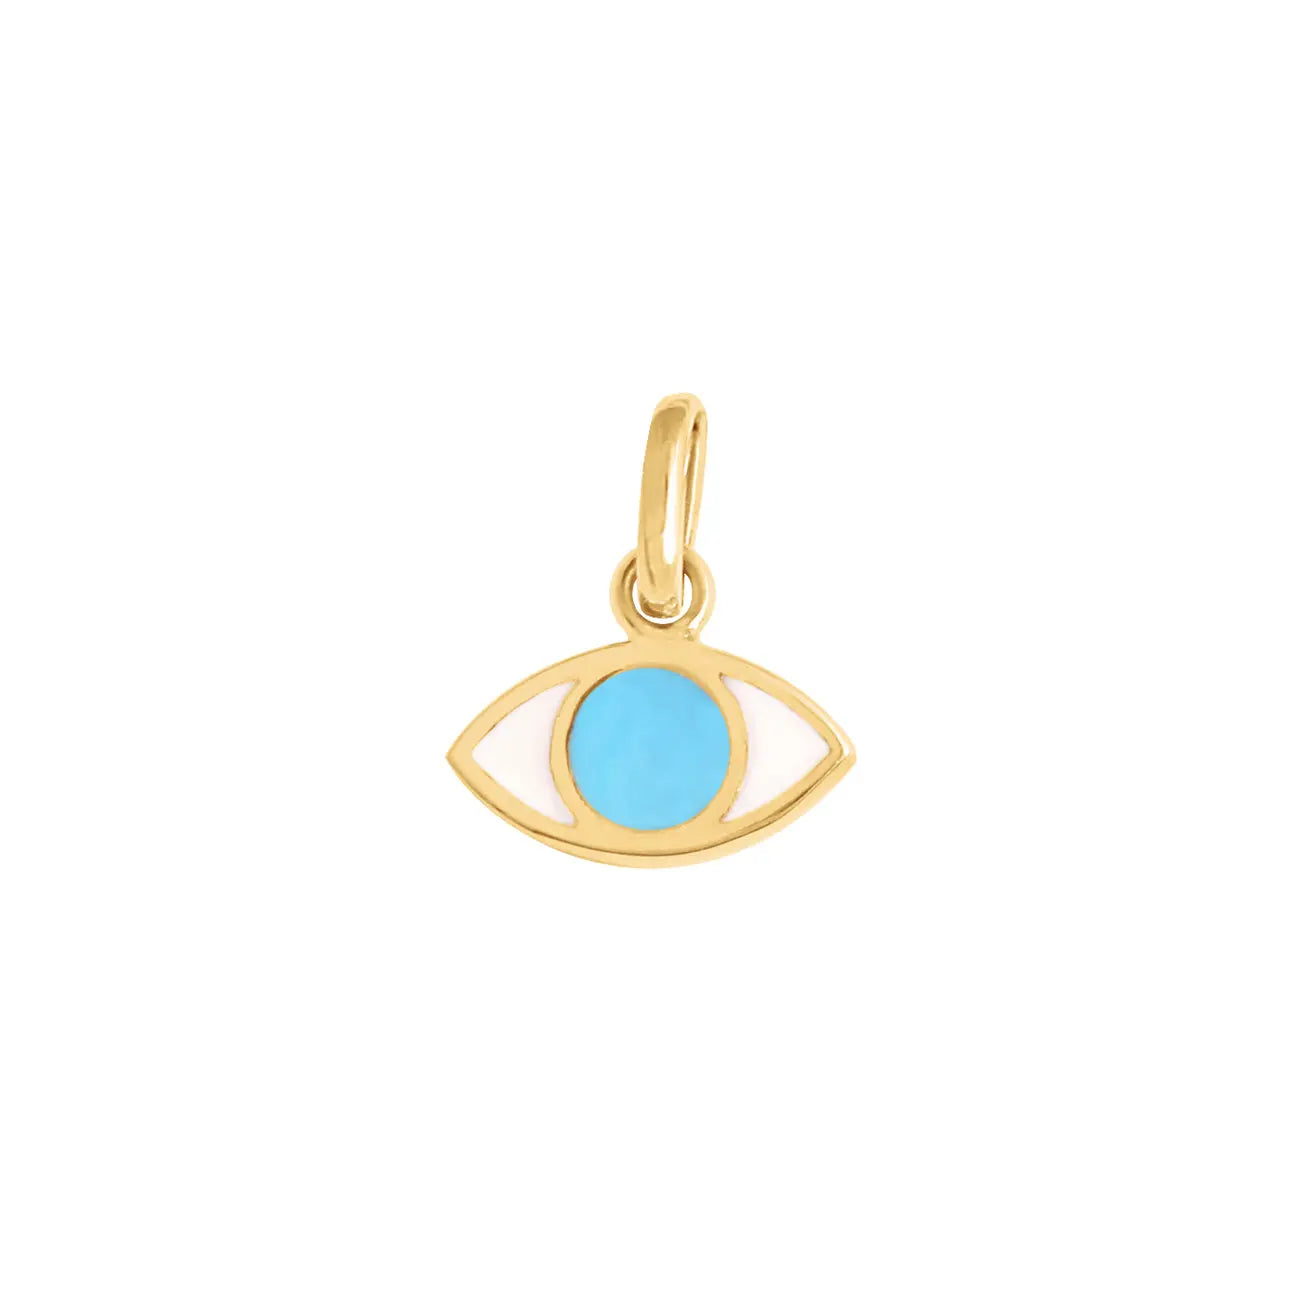 The Eye pendant by gigi CLOZEAU features signature 18 carat Yellow Gold, rich turquoise resin and a playful design for a sophisticated and modern appeal. Each jewel is unique, artisanally made in its family-owned workshop. The pendant measures 0.2" (with bail 0.4"), pendant sold without chain.